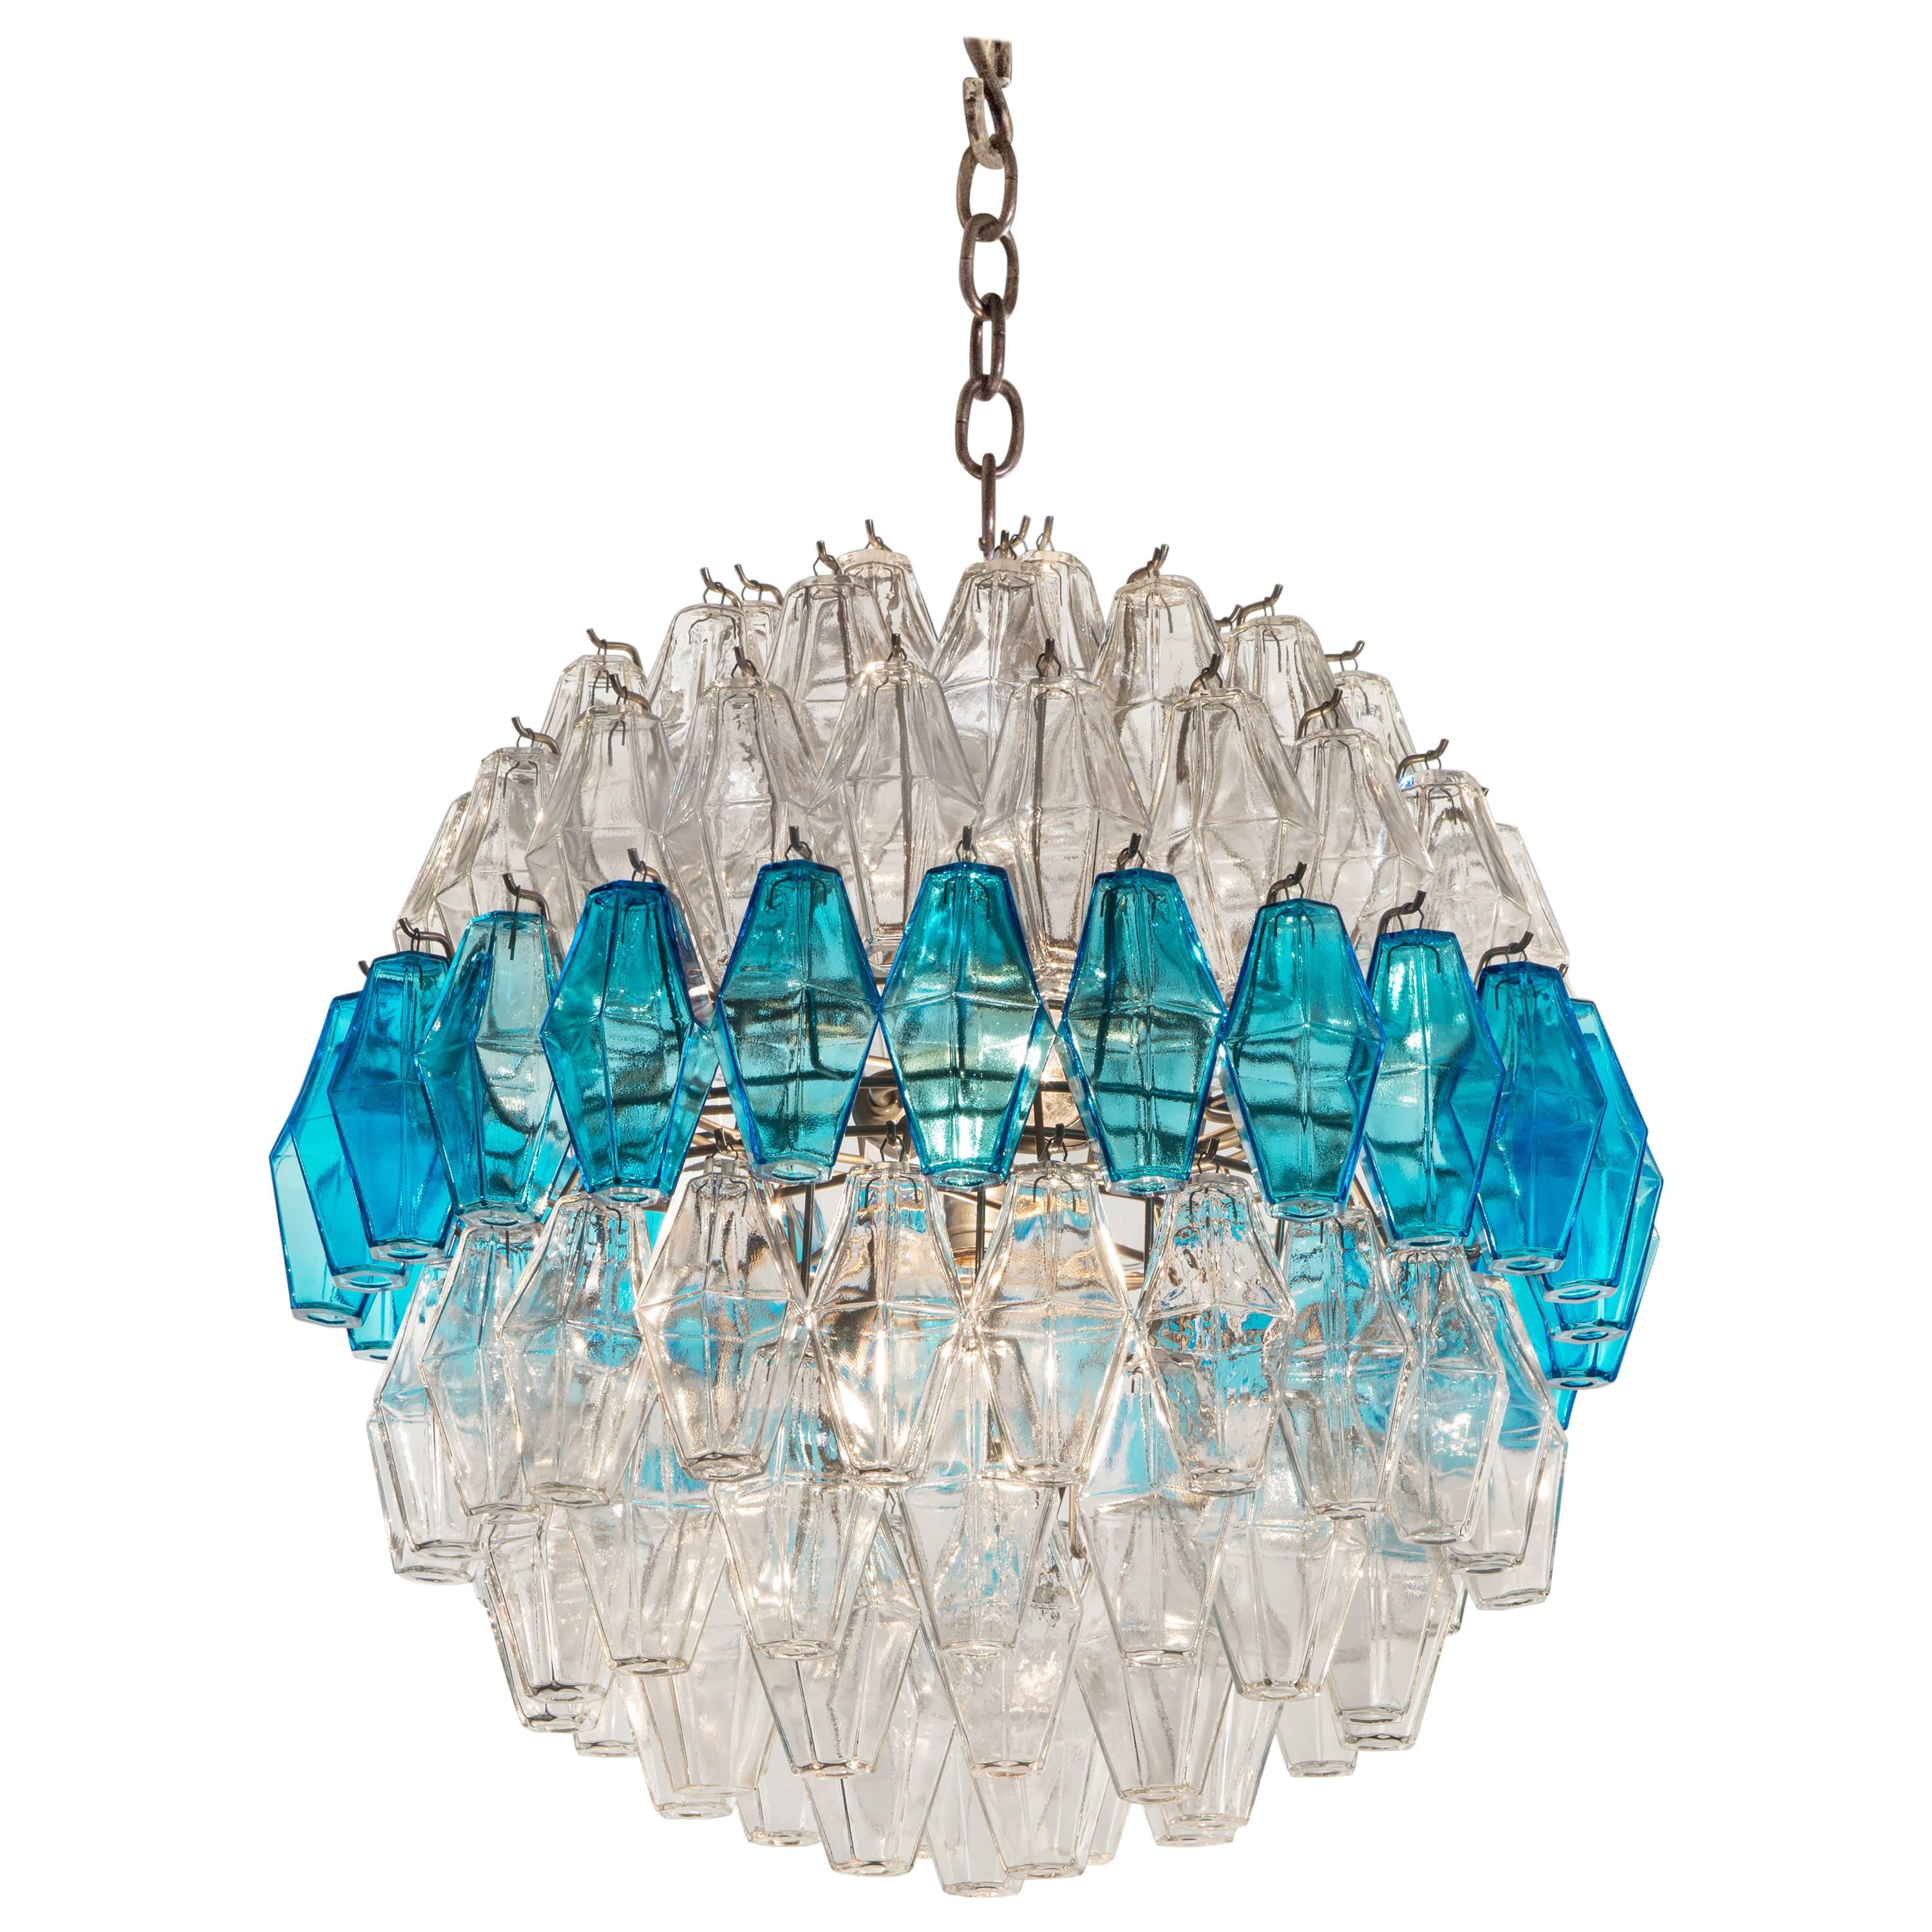 Rare Spherical Form Blue and Colorless Murano Glass Chandelier For Sale